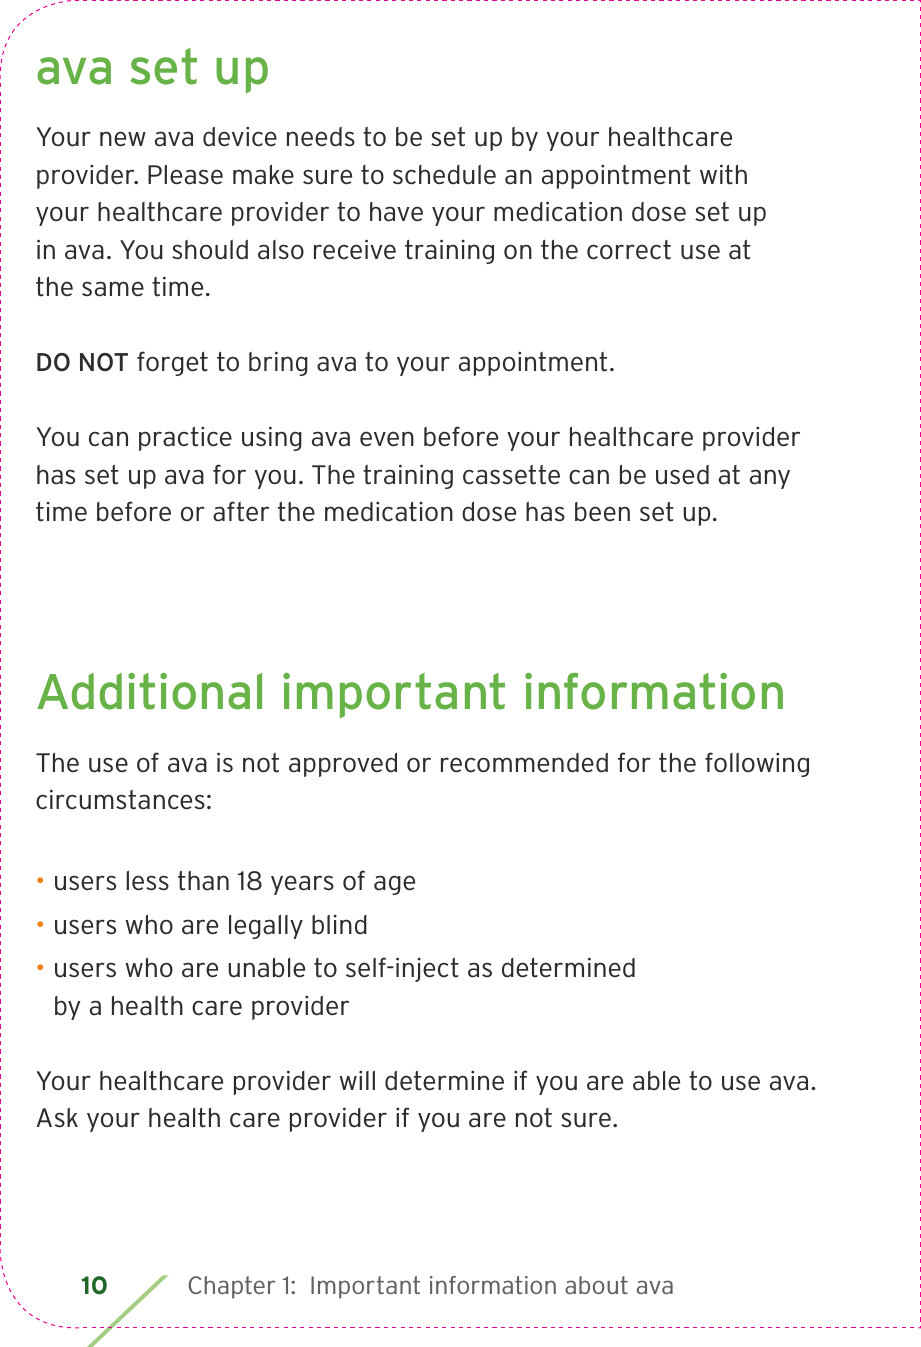 10 Chapter 1:  Important information about avaava set upYour new ava device needs to be set up by your healthcare provider. Please make sure to schedule an appointment with  your healthcare provider to have your medication dose set up  in ava. You should also receive training on the correct use at  the same time.DO NOT forget to bring ava to your appointment.You can practice using ava even before your healthcare provider has set up ava for you. The training cassette can be used at any time before or after the medication dose has been set up.Additional important informationThe use of ava is not approved or recommended for the following circumstances:• users less than 18 years of age• users who are legally blind• users who are unable to self-inject as determined  by a health care providerYour healthcare provider will determine if you are able to use ava.  Ask your health care provider if you are not sure.